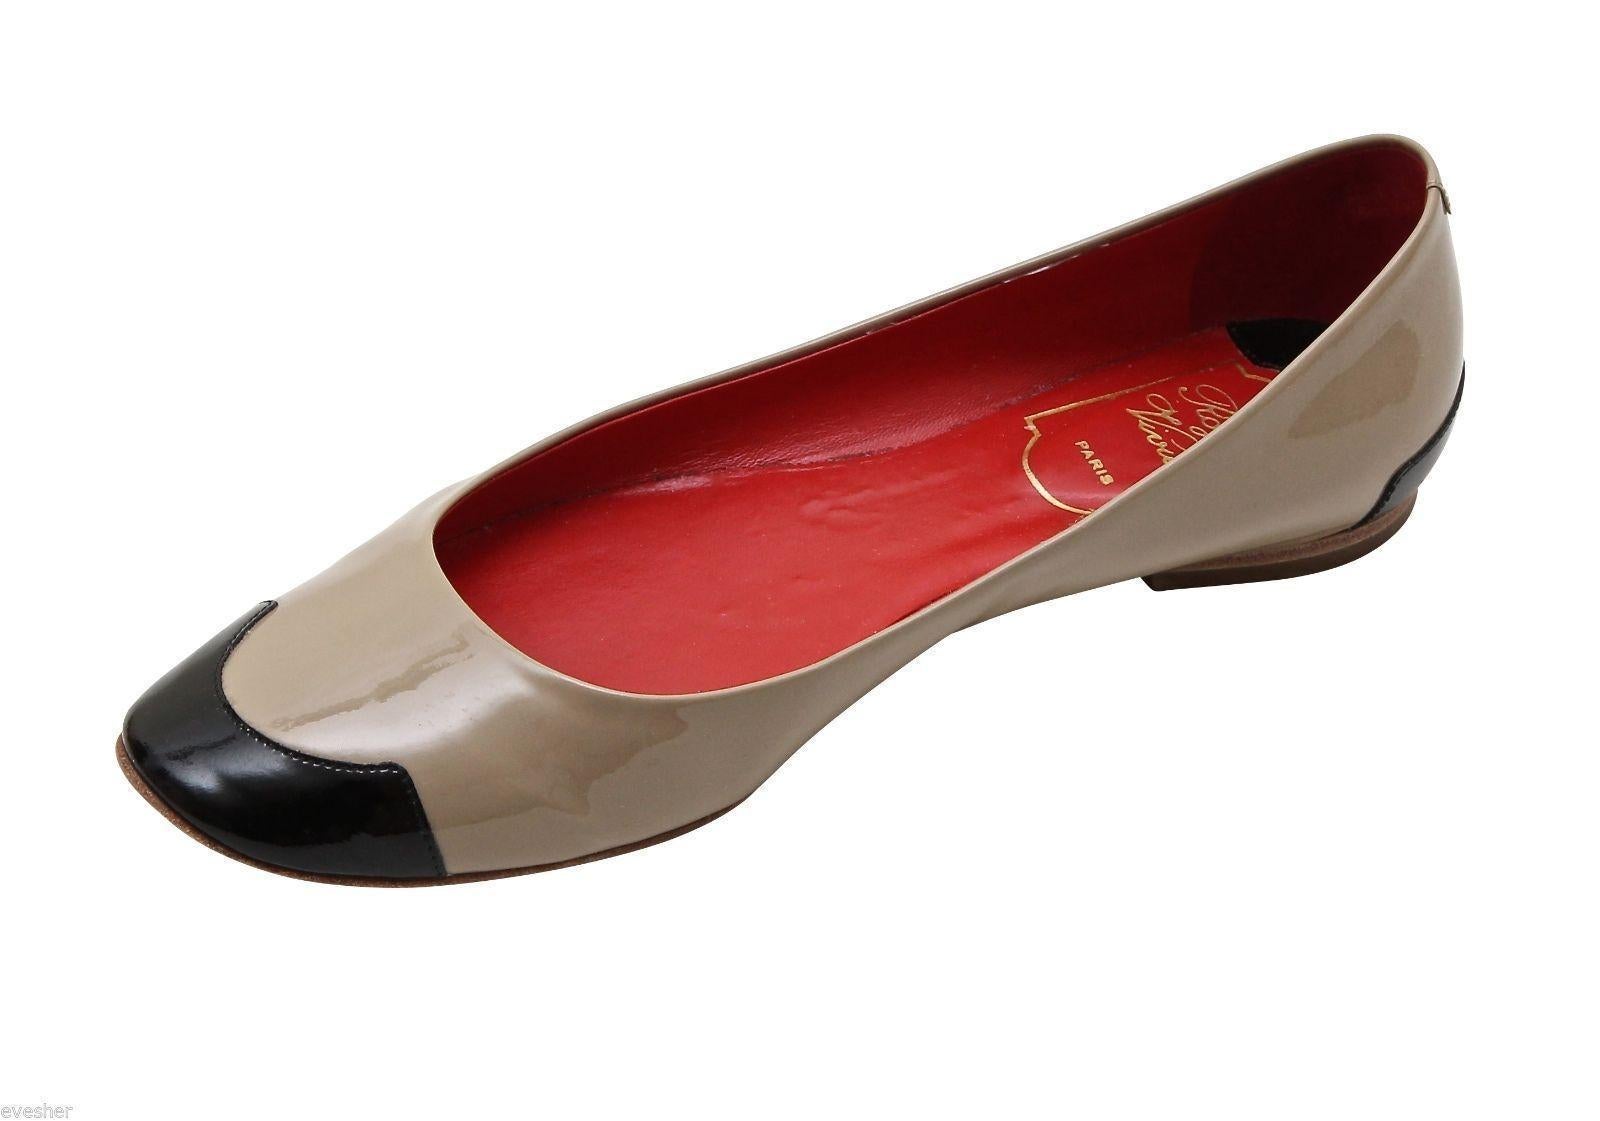 GUARANTEED AUTHENTIC ROGER VIVIER BALLET HELLO COCO T.05 CLASSIC FLATS

Details:
 - Taupe patent leather uppers with black patent leather trim at toes and heels
 - Rounded toe
 - Leather insole and sole
 - Comes with original Roger Vivier shoe